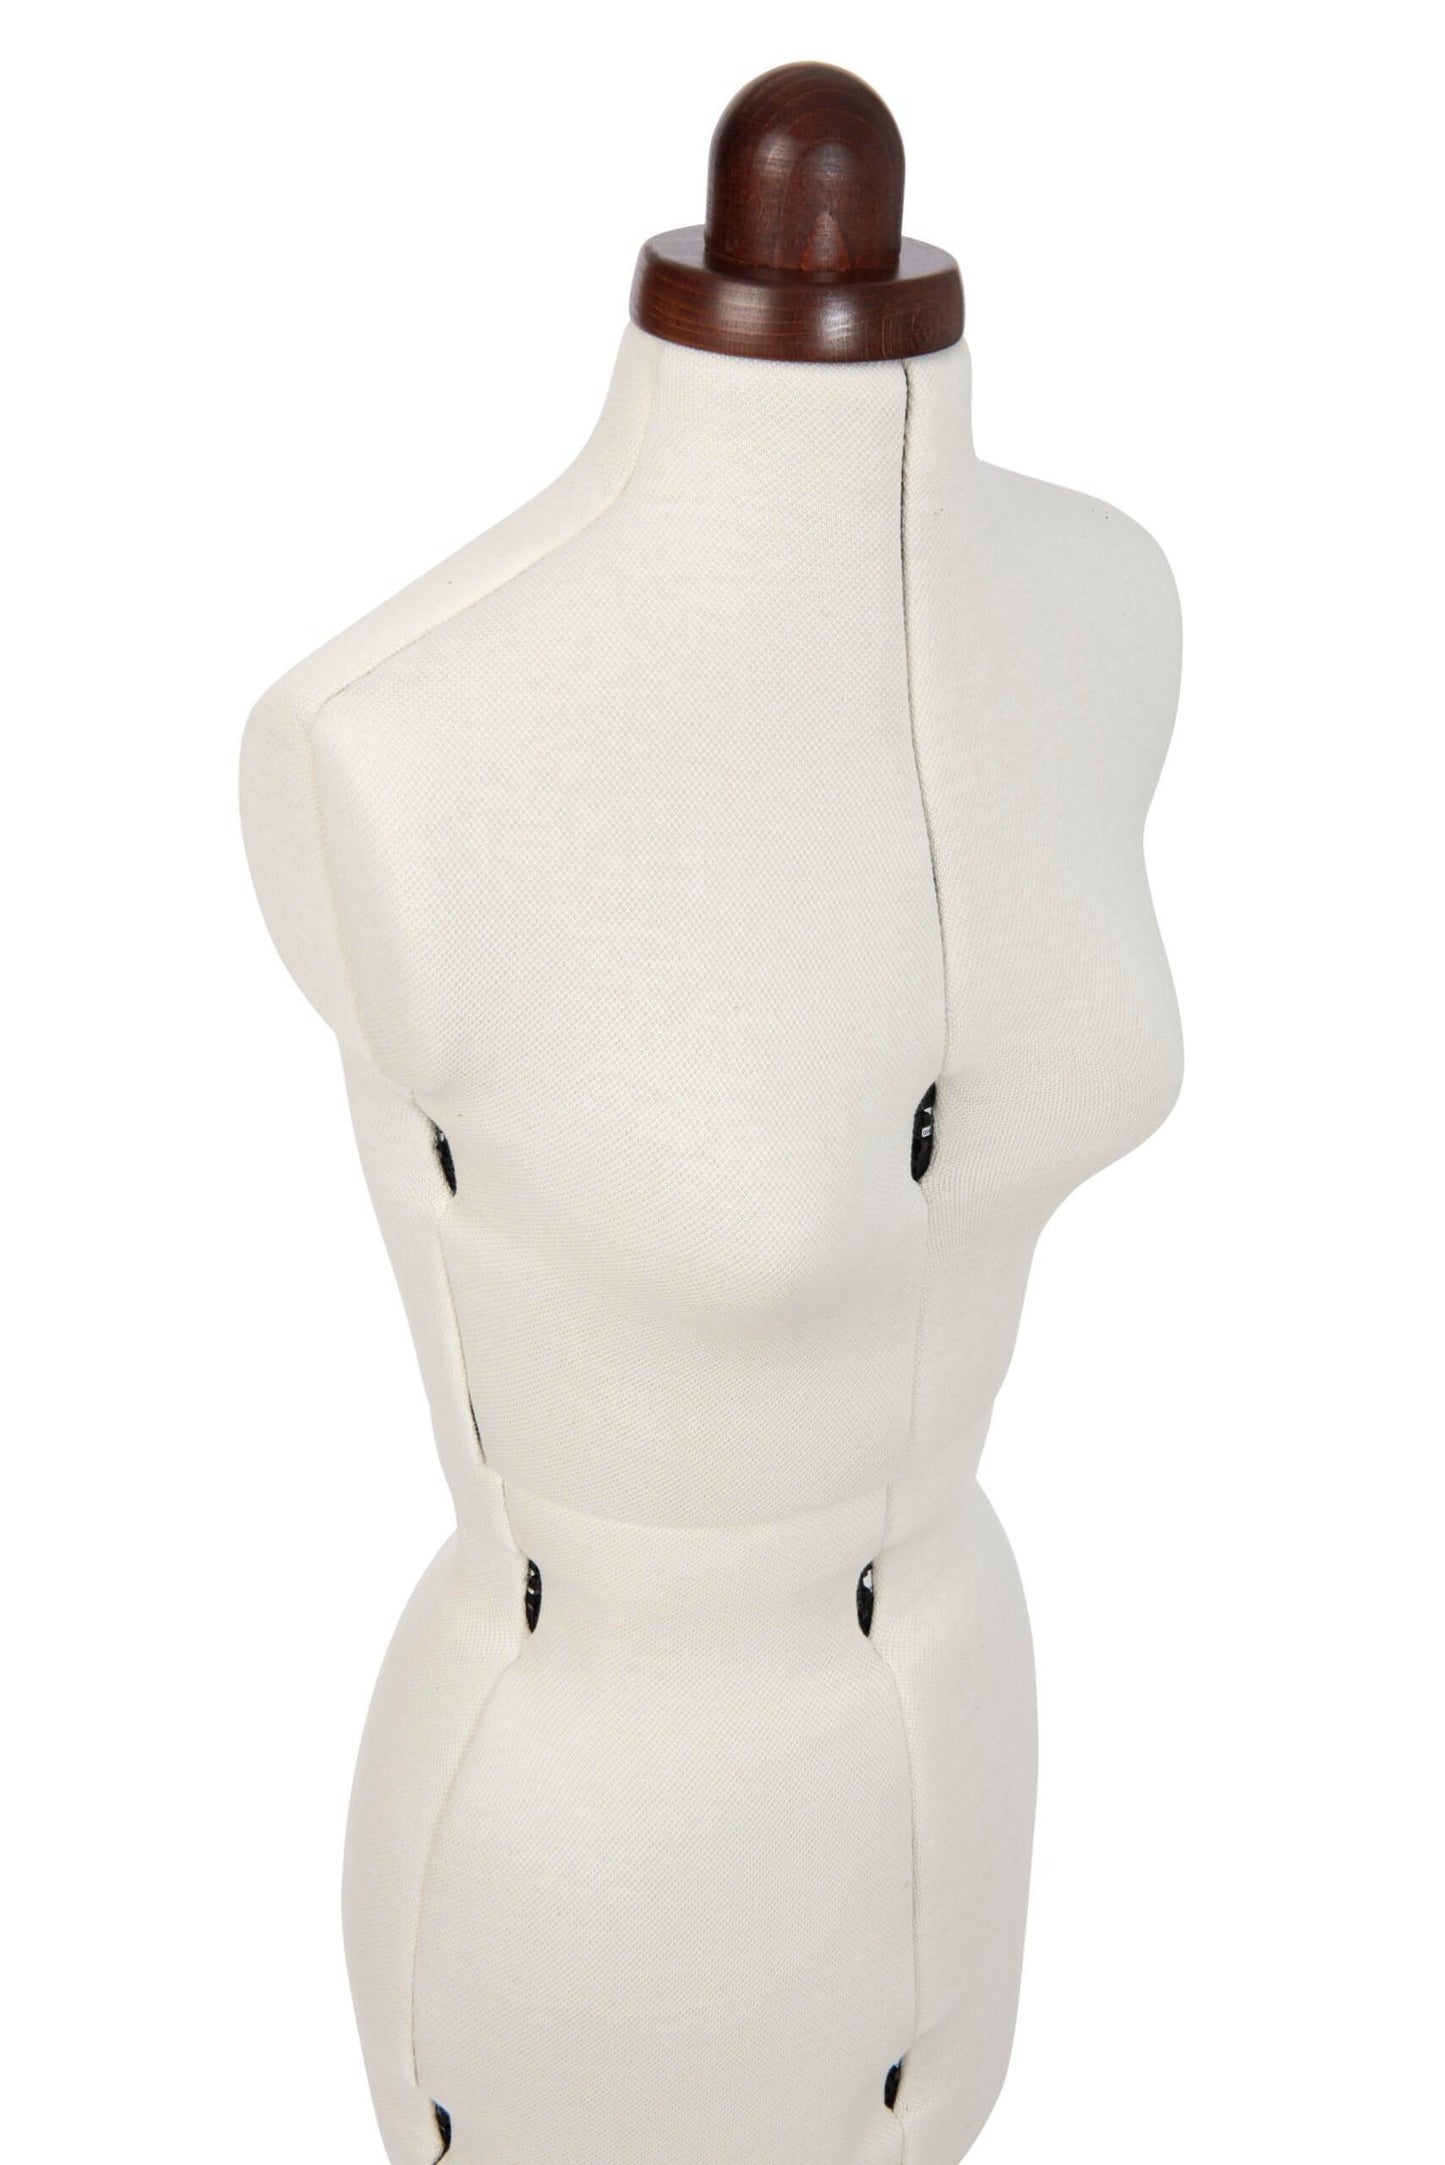 Adjustoform * made in the UK * Lady Valet Dress Form (Ecru) available in 4 sizes with 12 adjusters